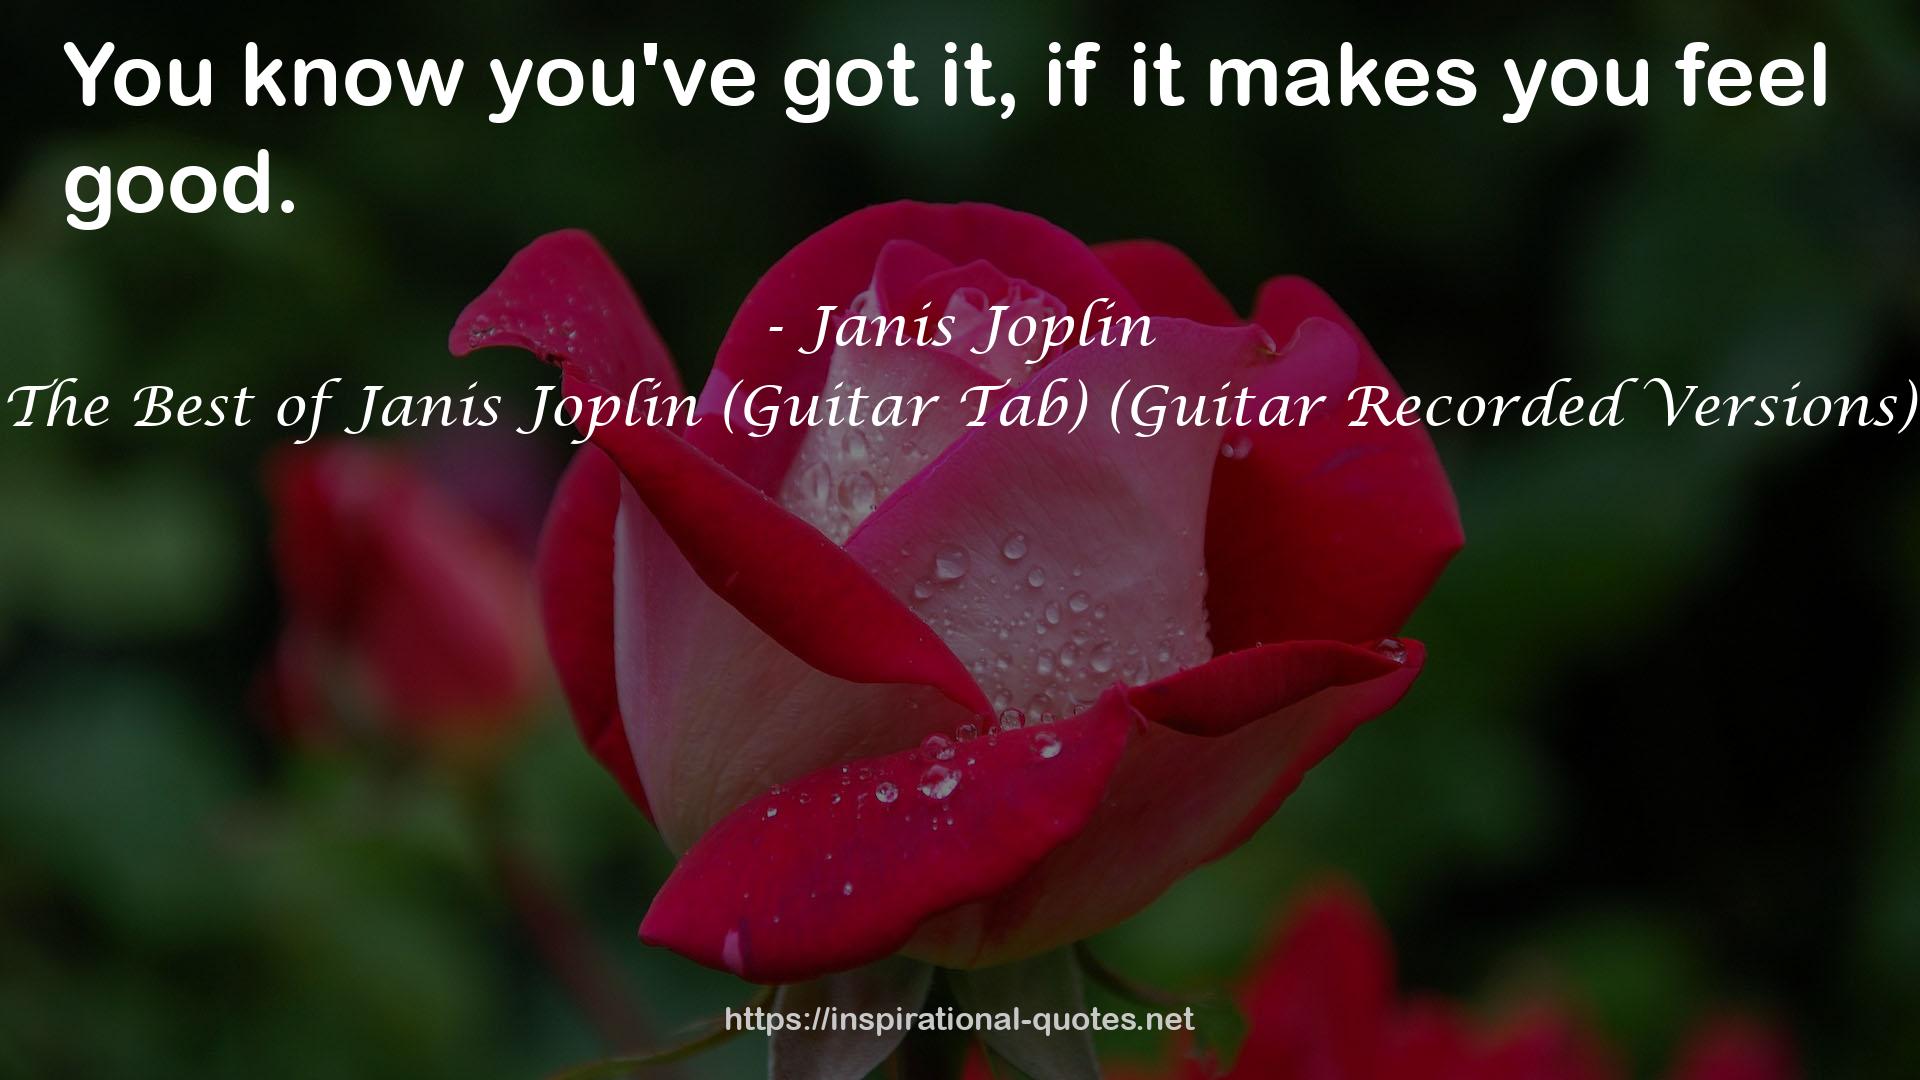 The Best of Janis Joplin (Guitar Tab) (Guitar Recorded Versions) QUOTES